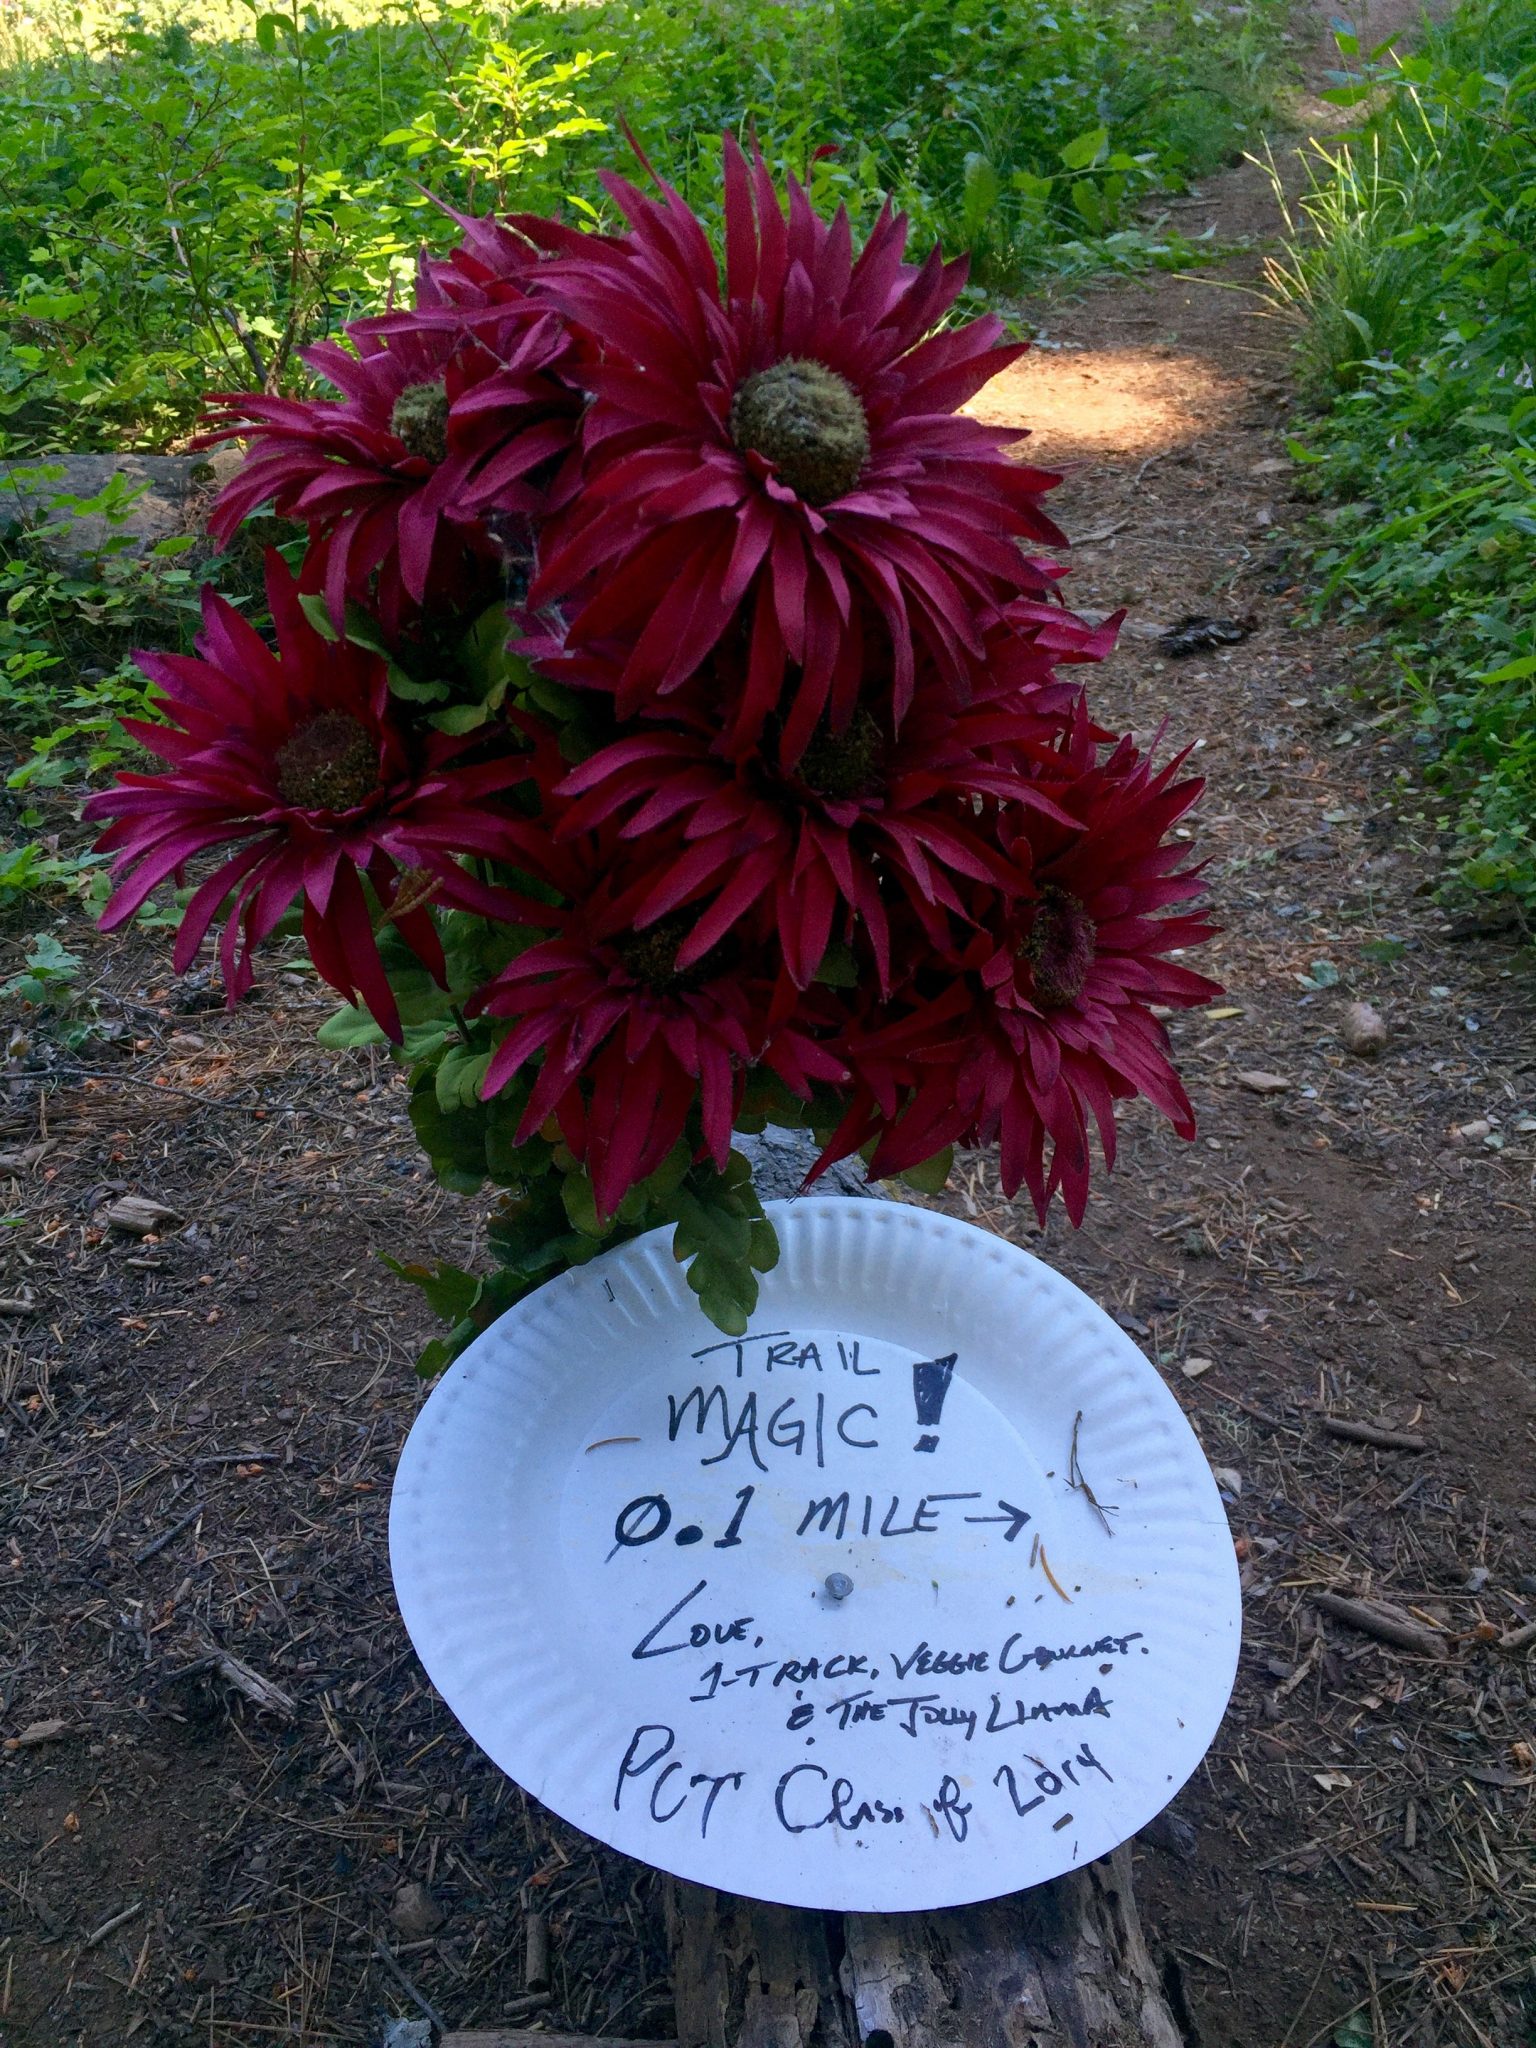 Handwritten message on a paper plate inviting us to trail magic at Le Bistro